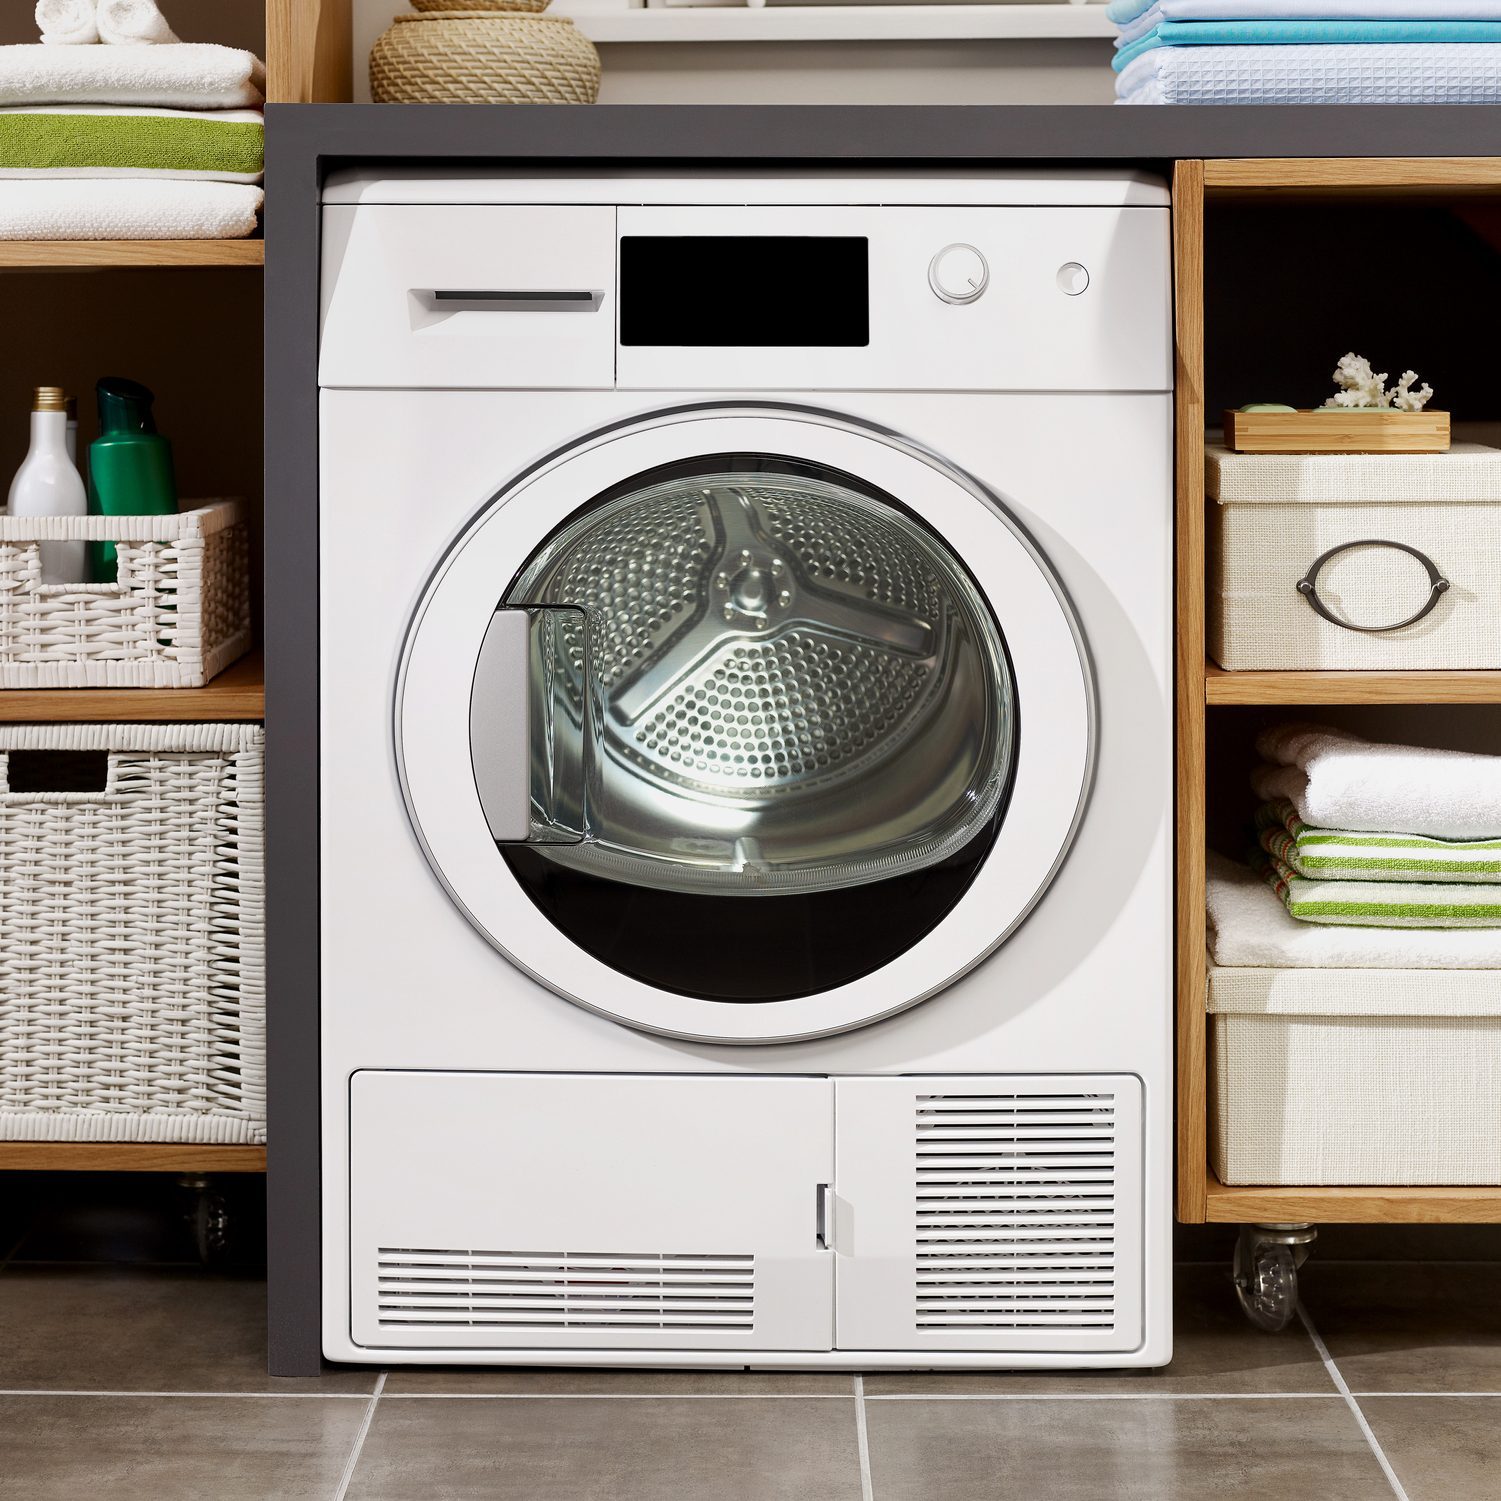 How to Clean a Washing Machine | Help Your Machine Last Longer